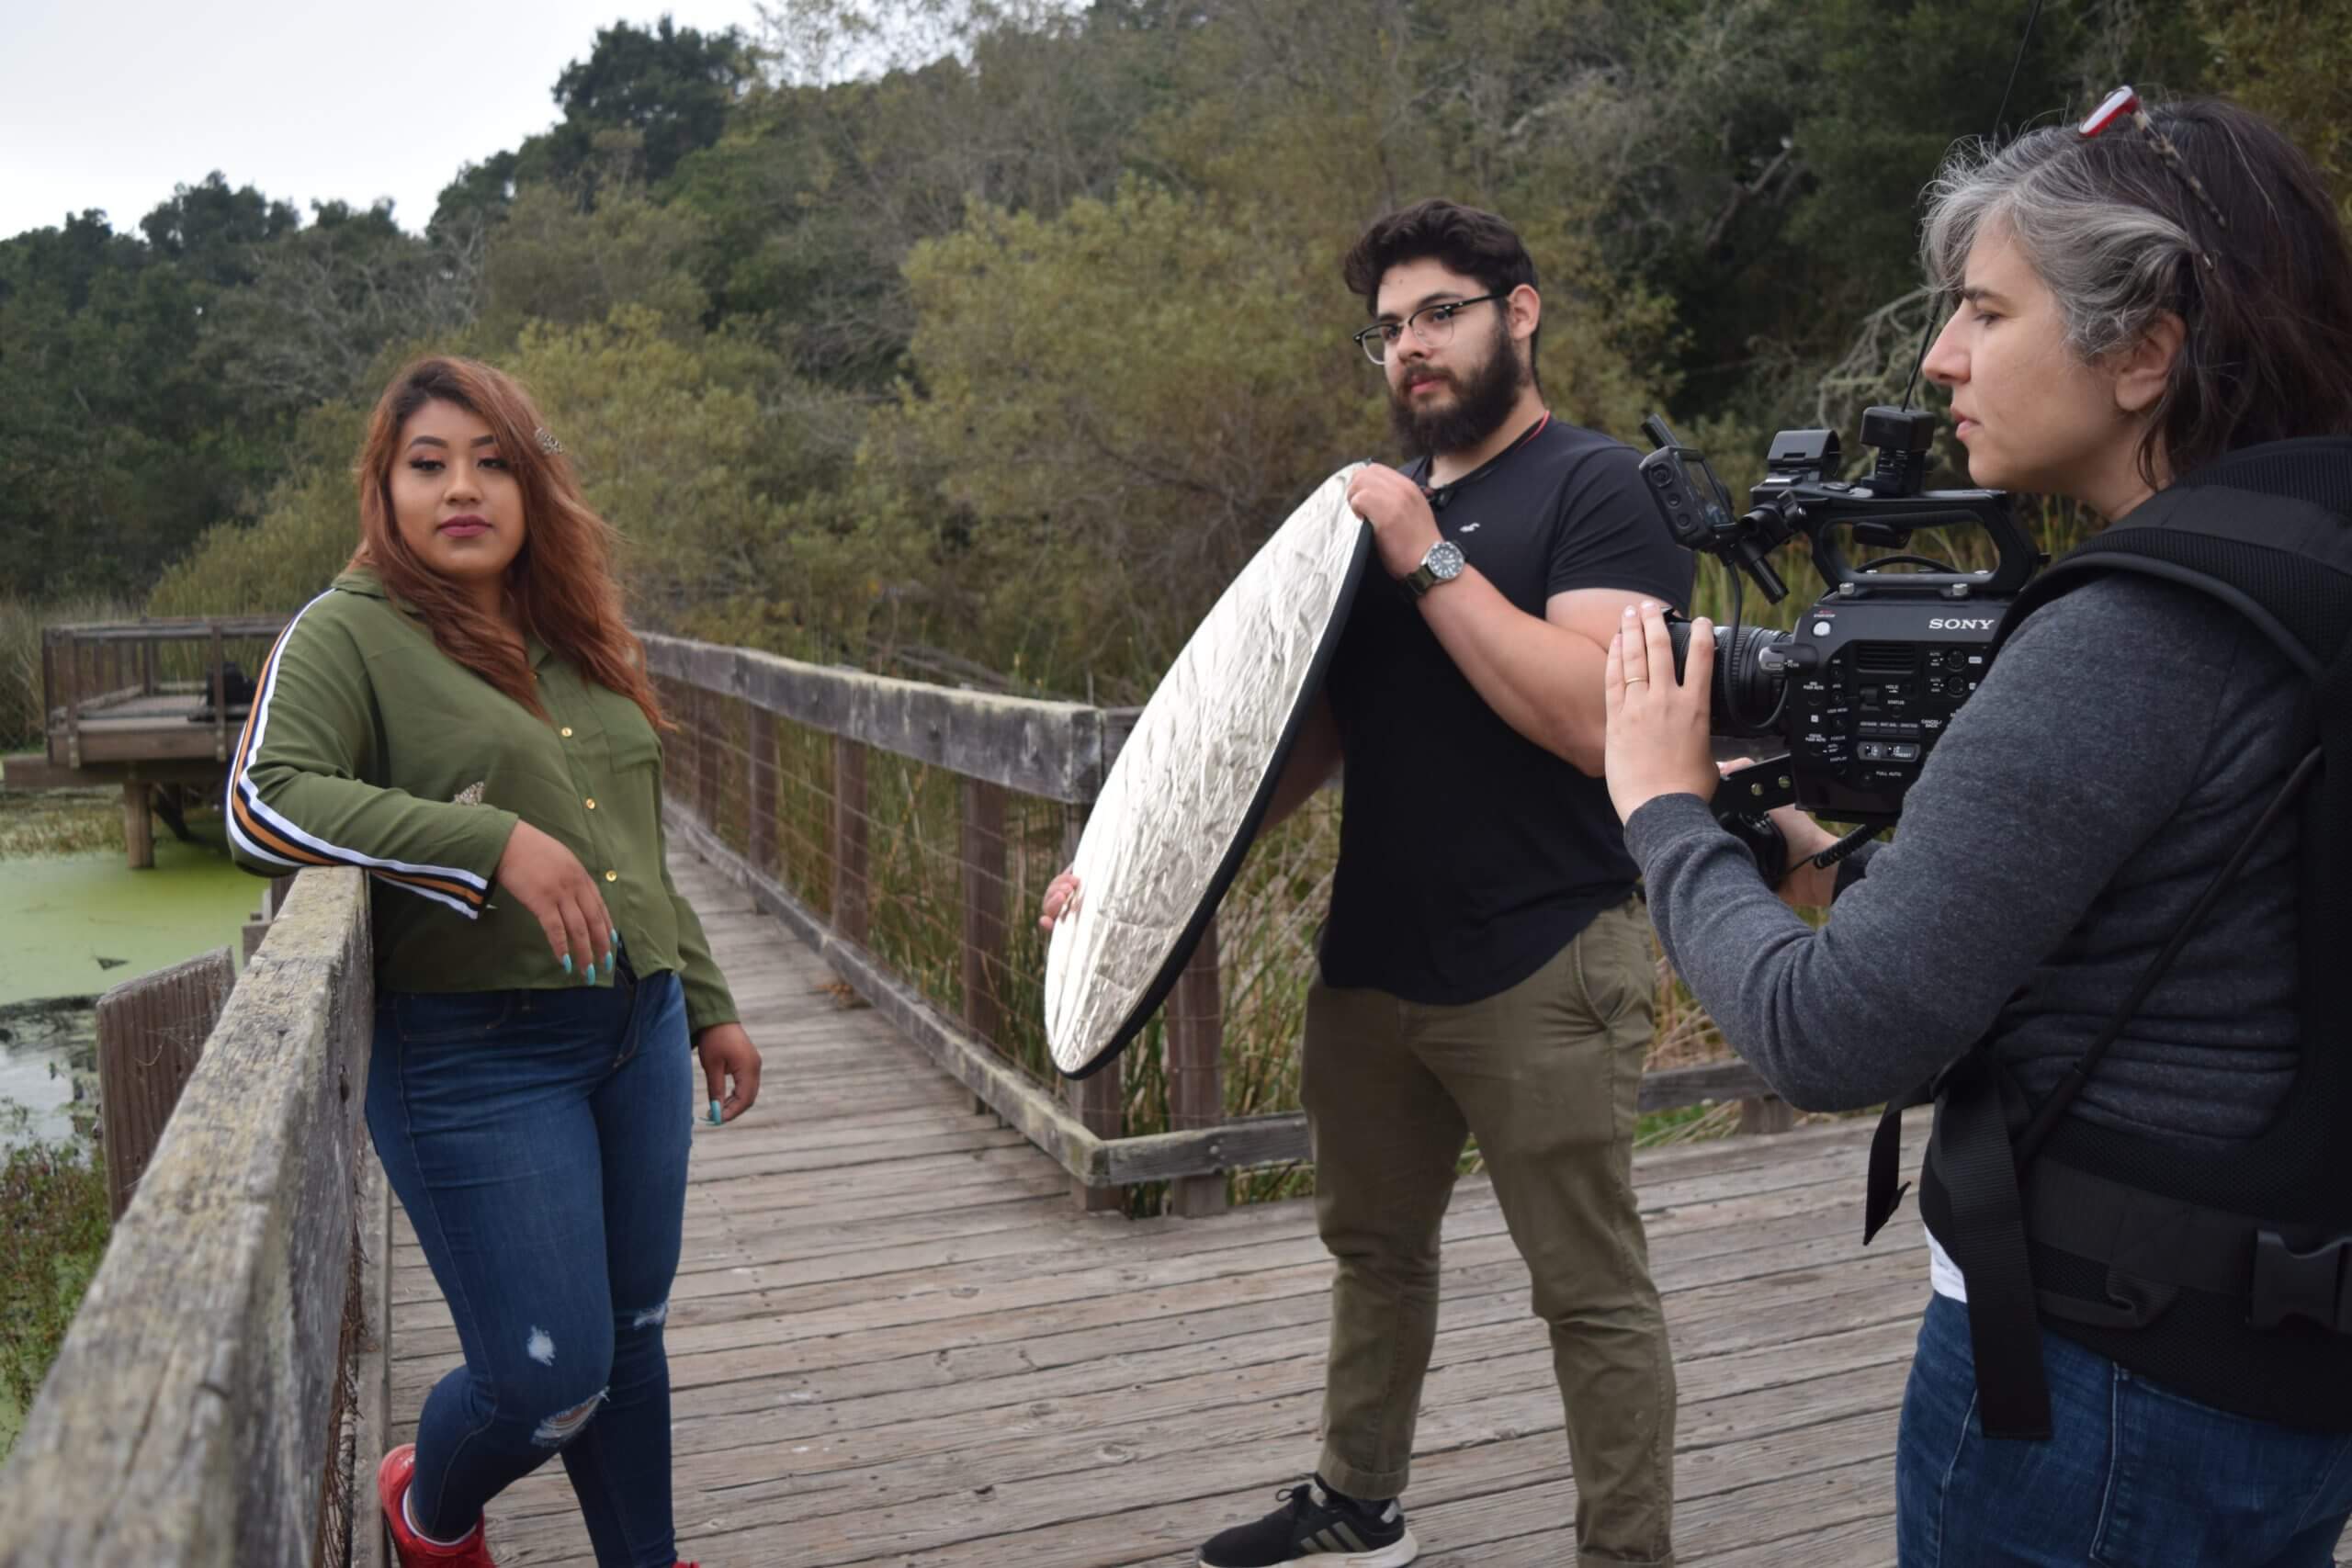 Production still from Fruits of Labor. Film protagonist, Ashley, is leaning with her arm against a wooden walkway. A man to her right holds a reflector directing light towards her. The film director, Emily Cohen Ibanez, is filming with her camera strapped to her chest via a harness.